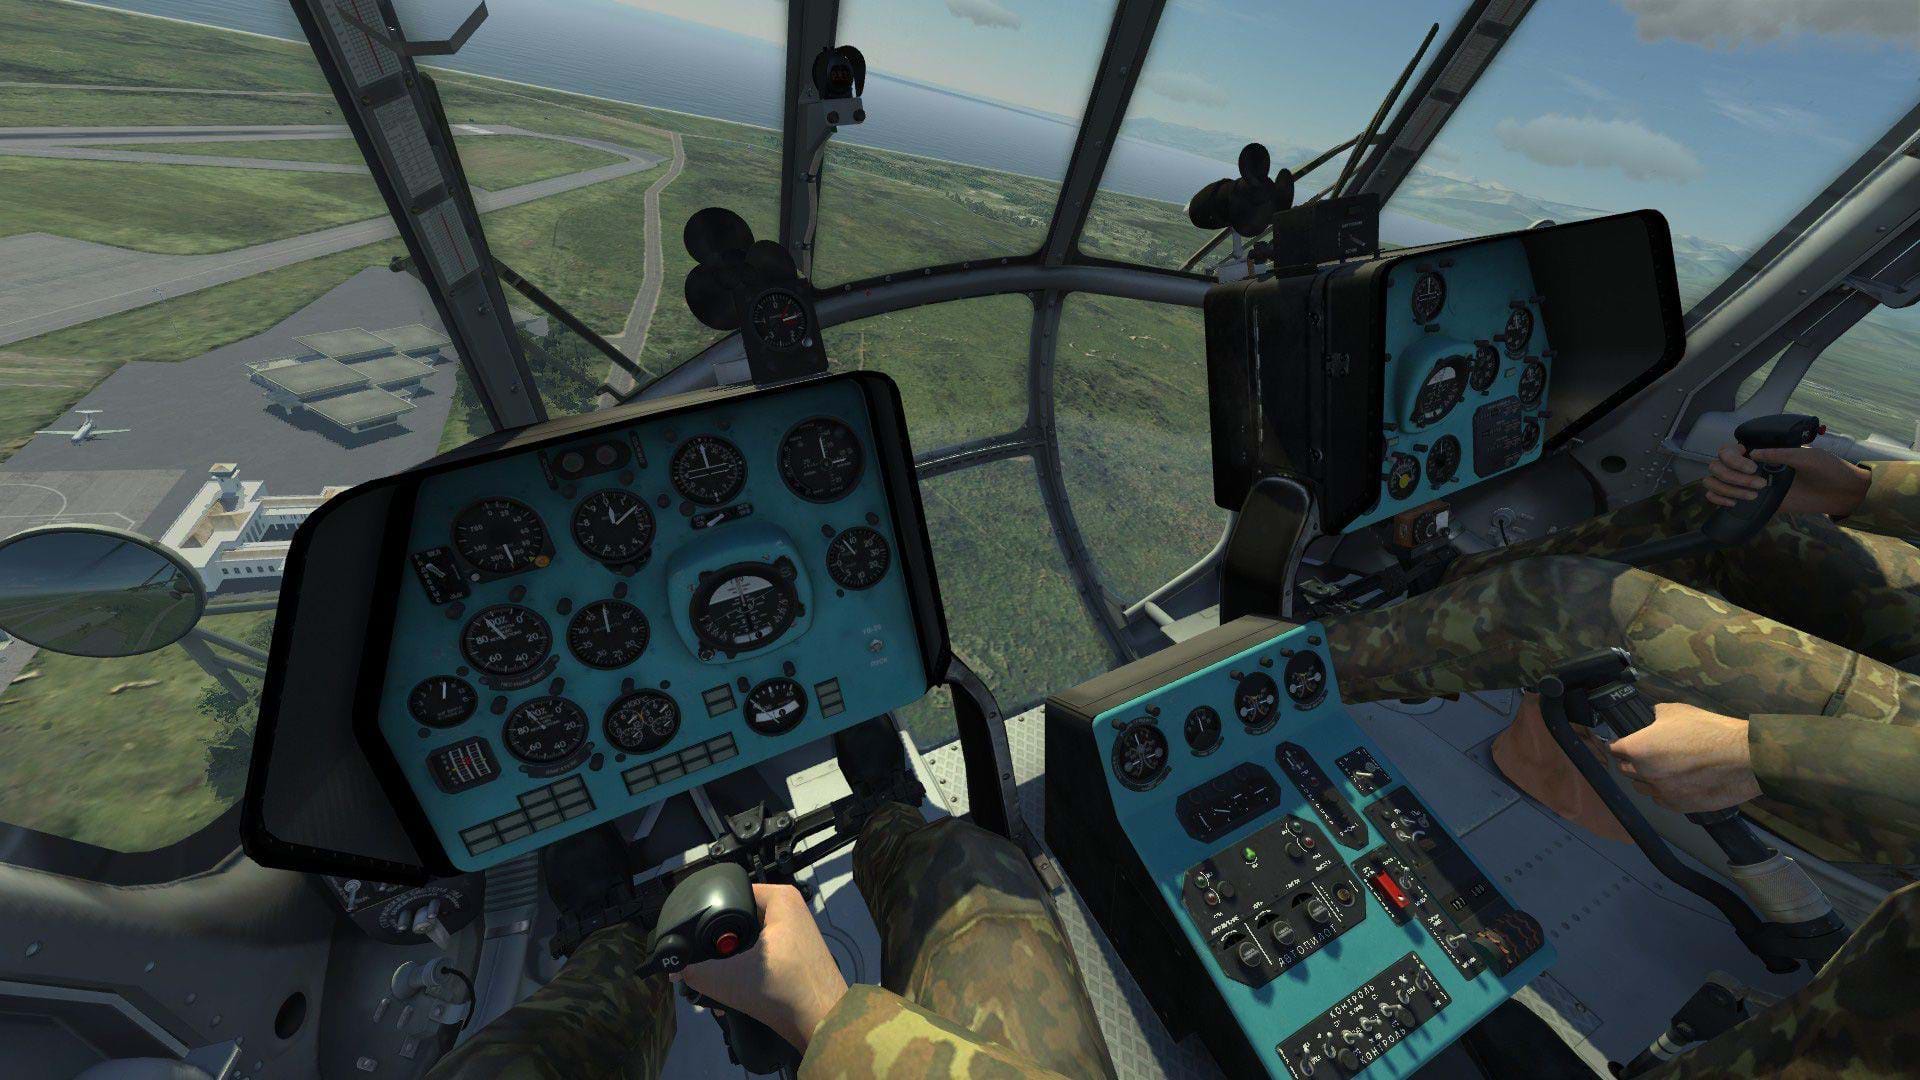 Transitional flight: from FSX to DCS